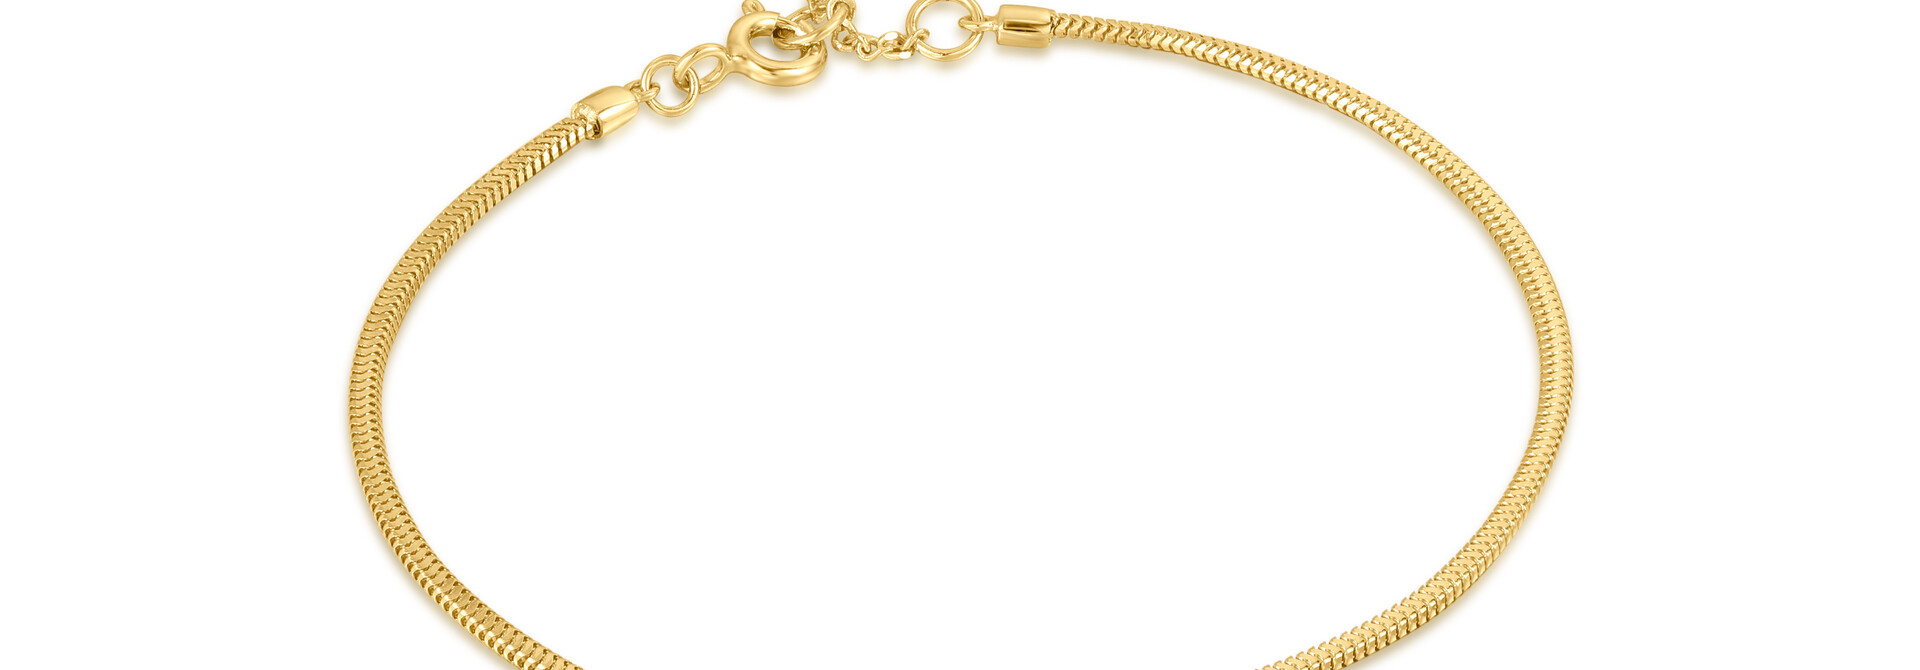 Snake Chain Armband - Gold plated